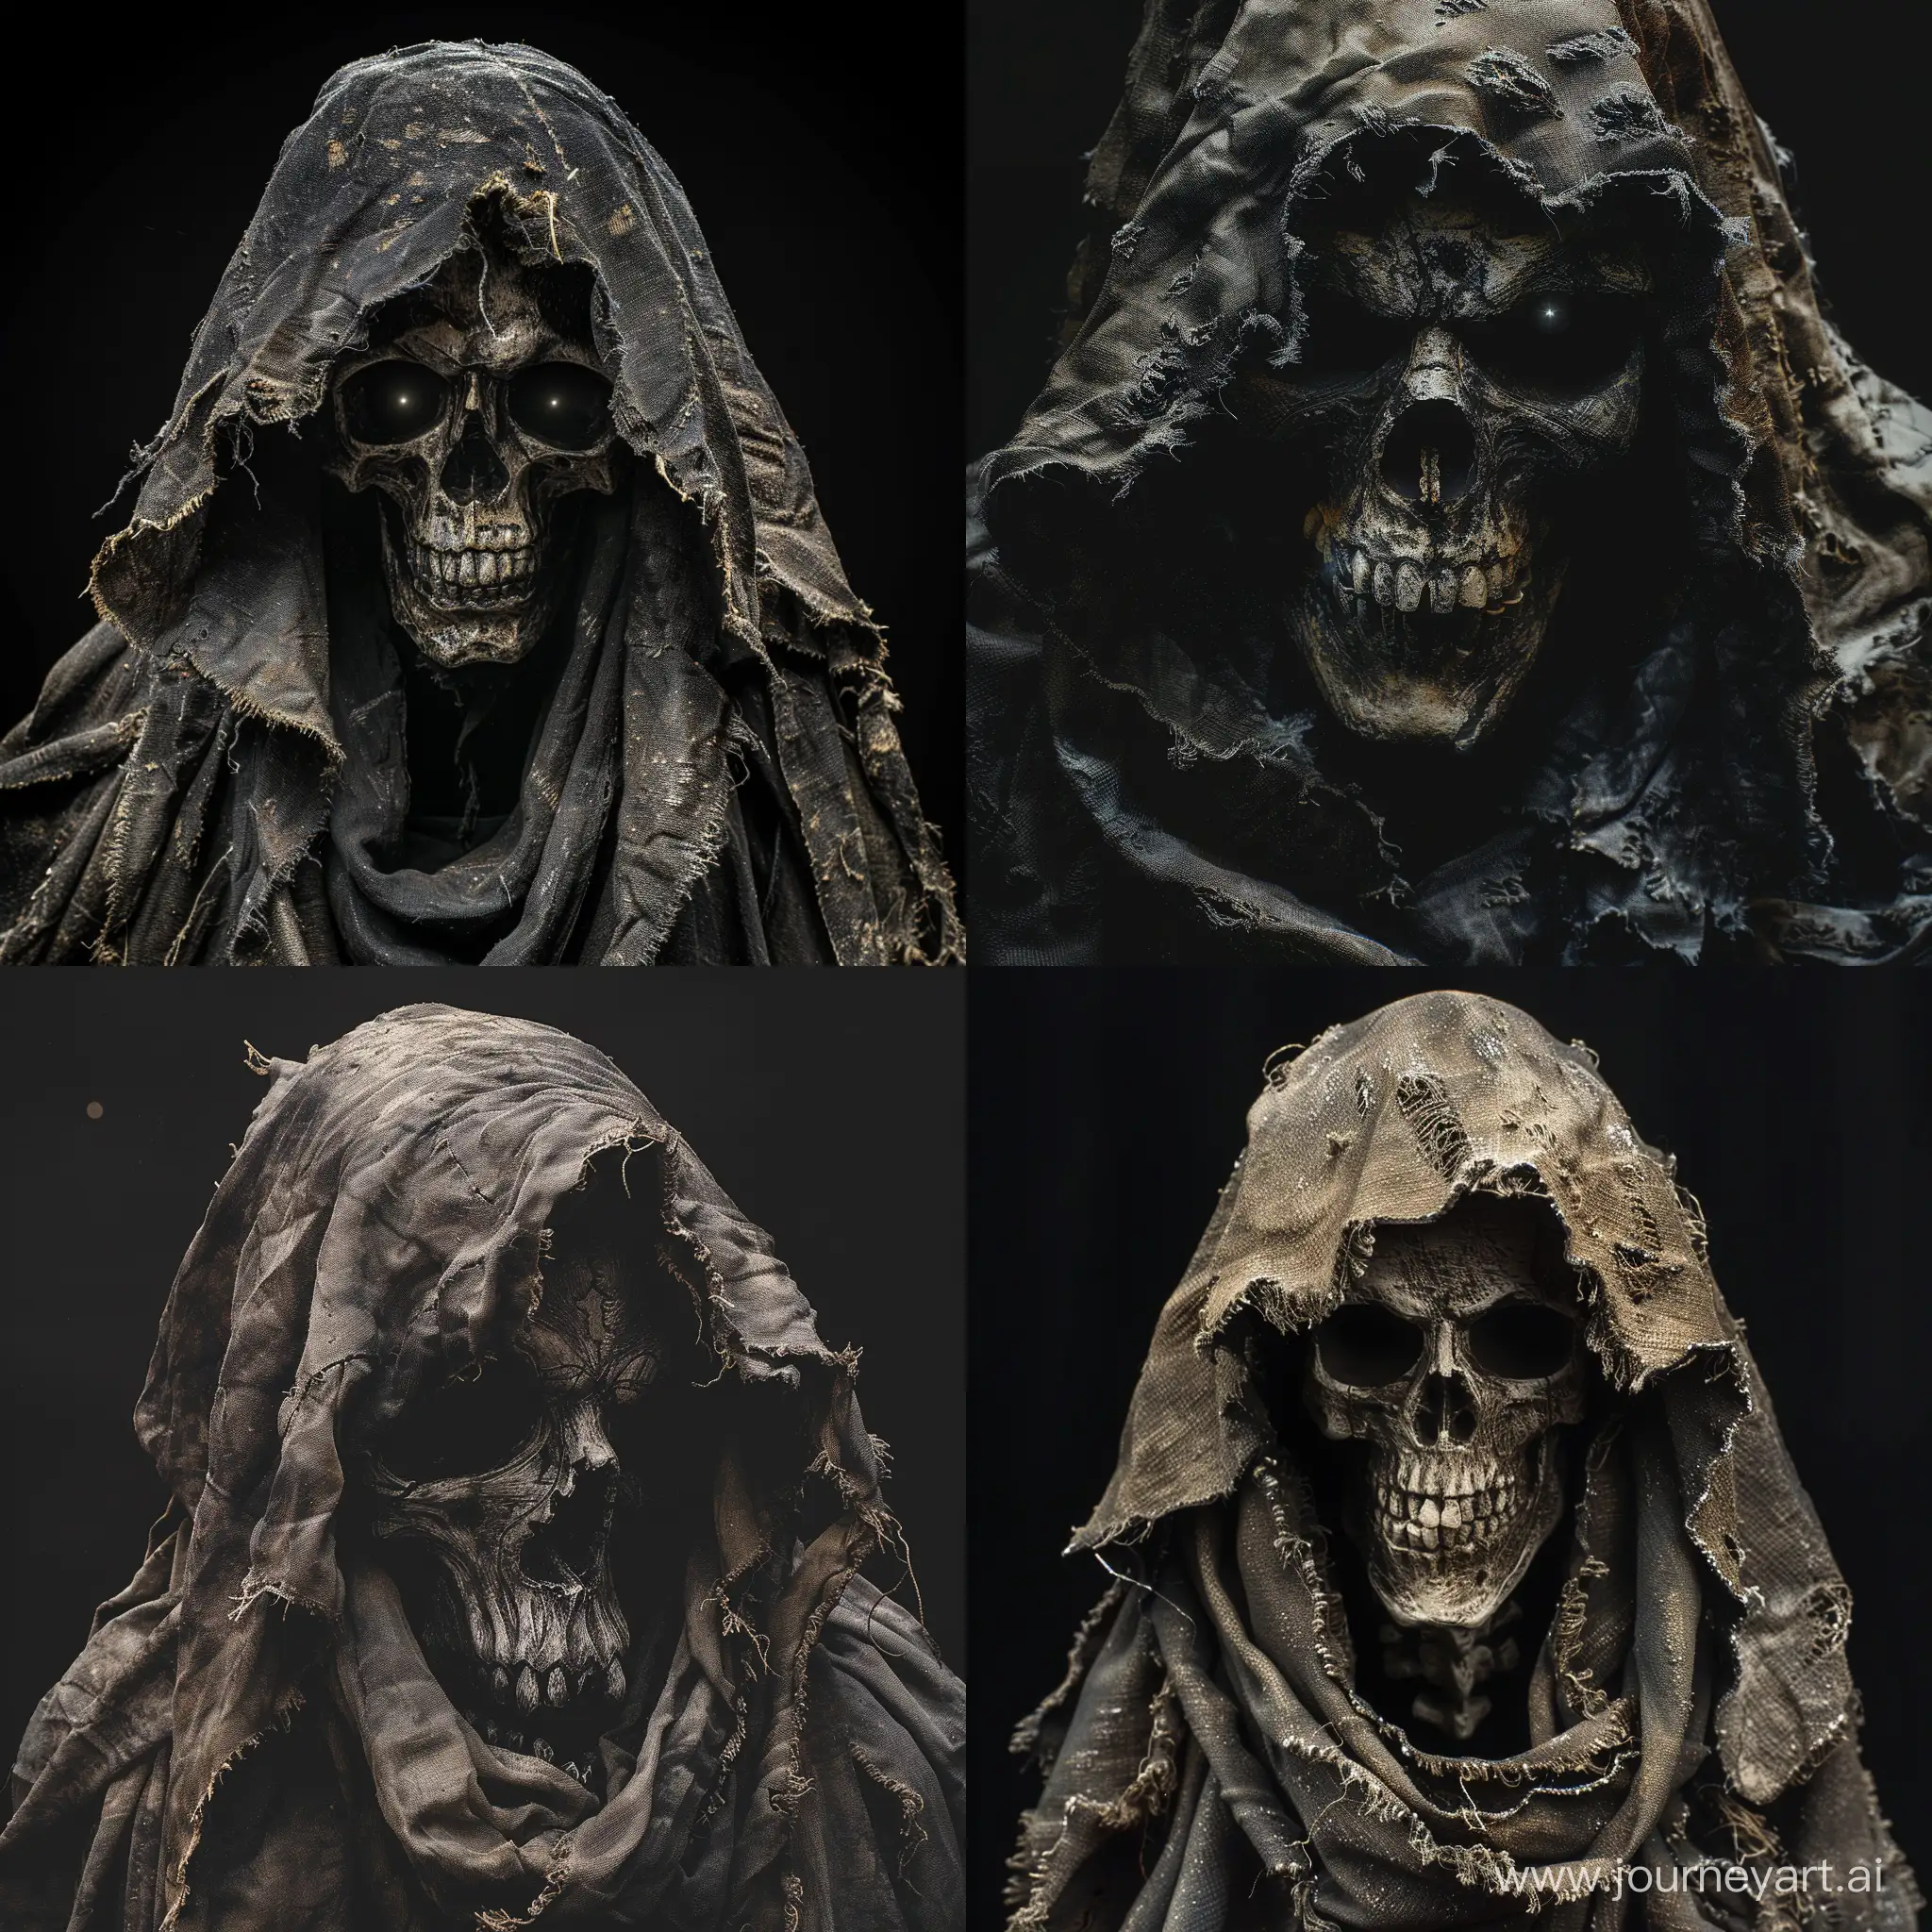 Ethereal-Grim-Reaper-Baroque-Style-Hooded-Figure-with-Elongated-Skull